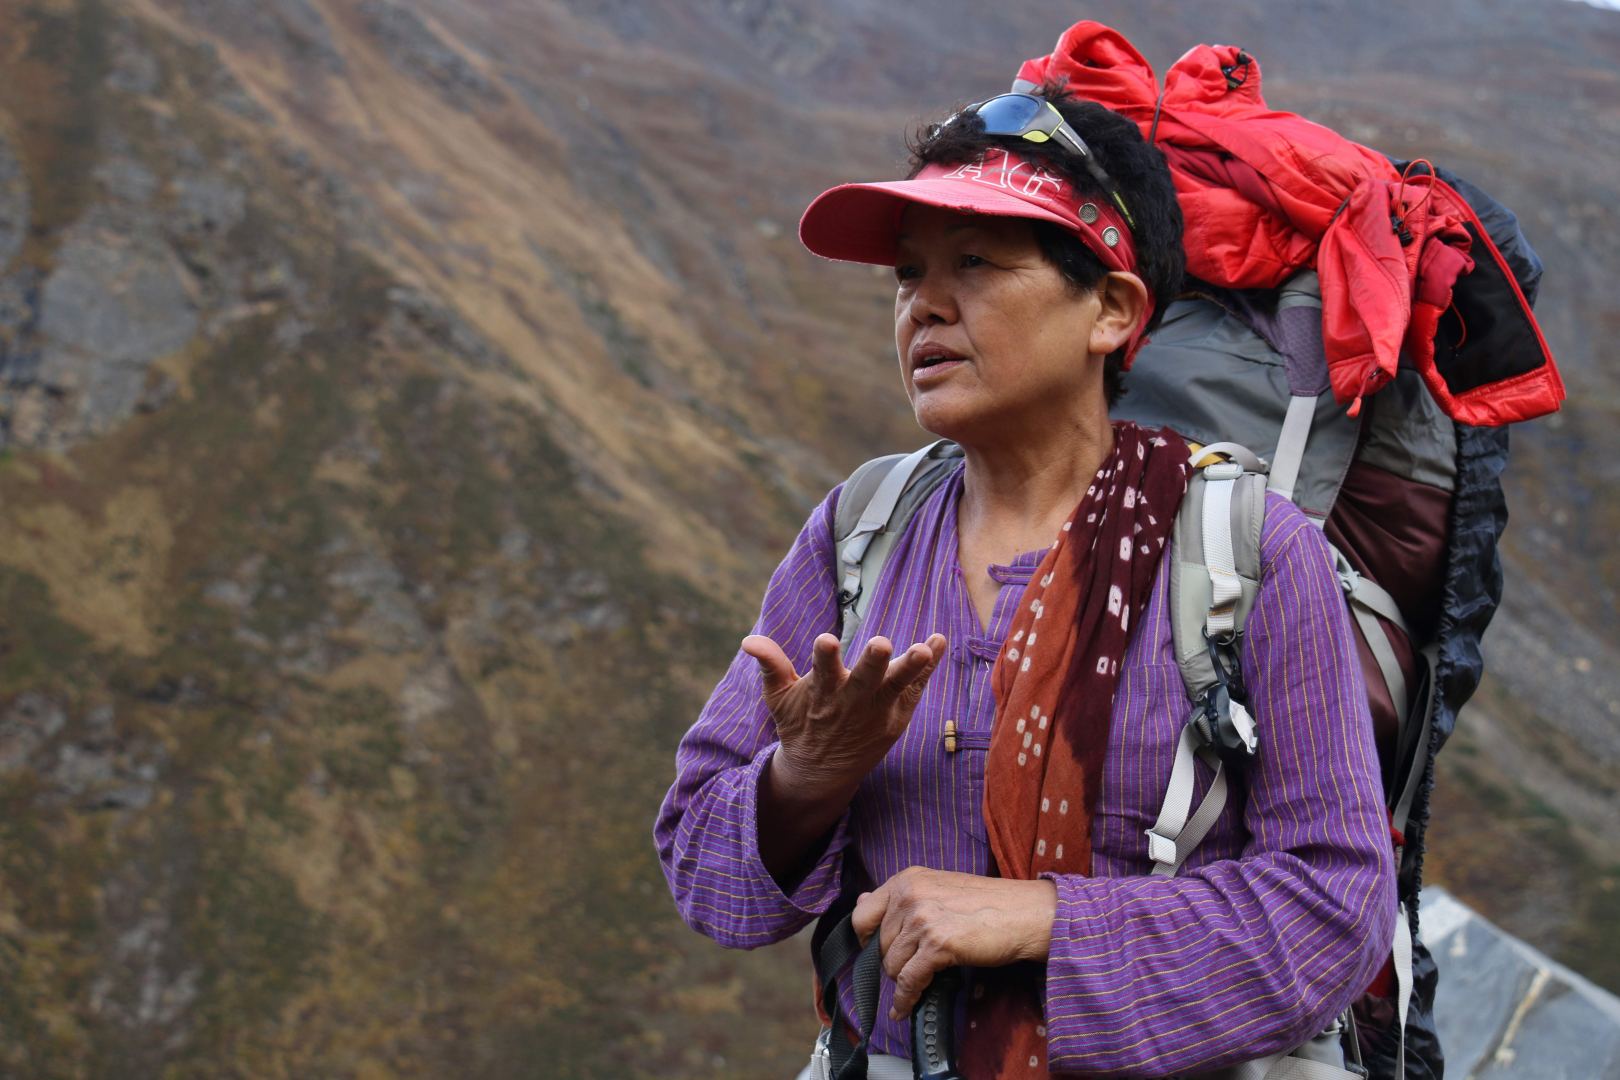 Bachendri Pal to lead all women team aged above 50 in a 5 month long Himalayan expedition